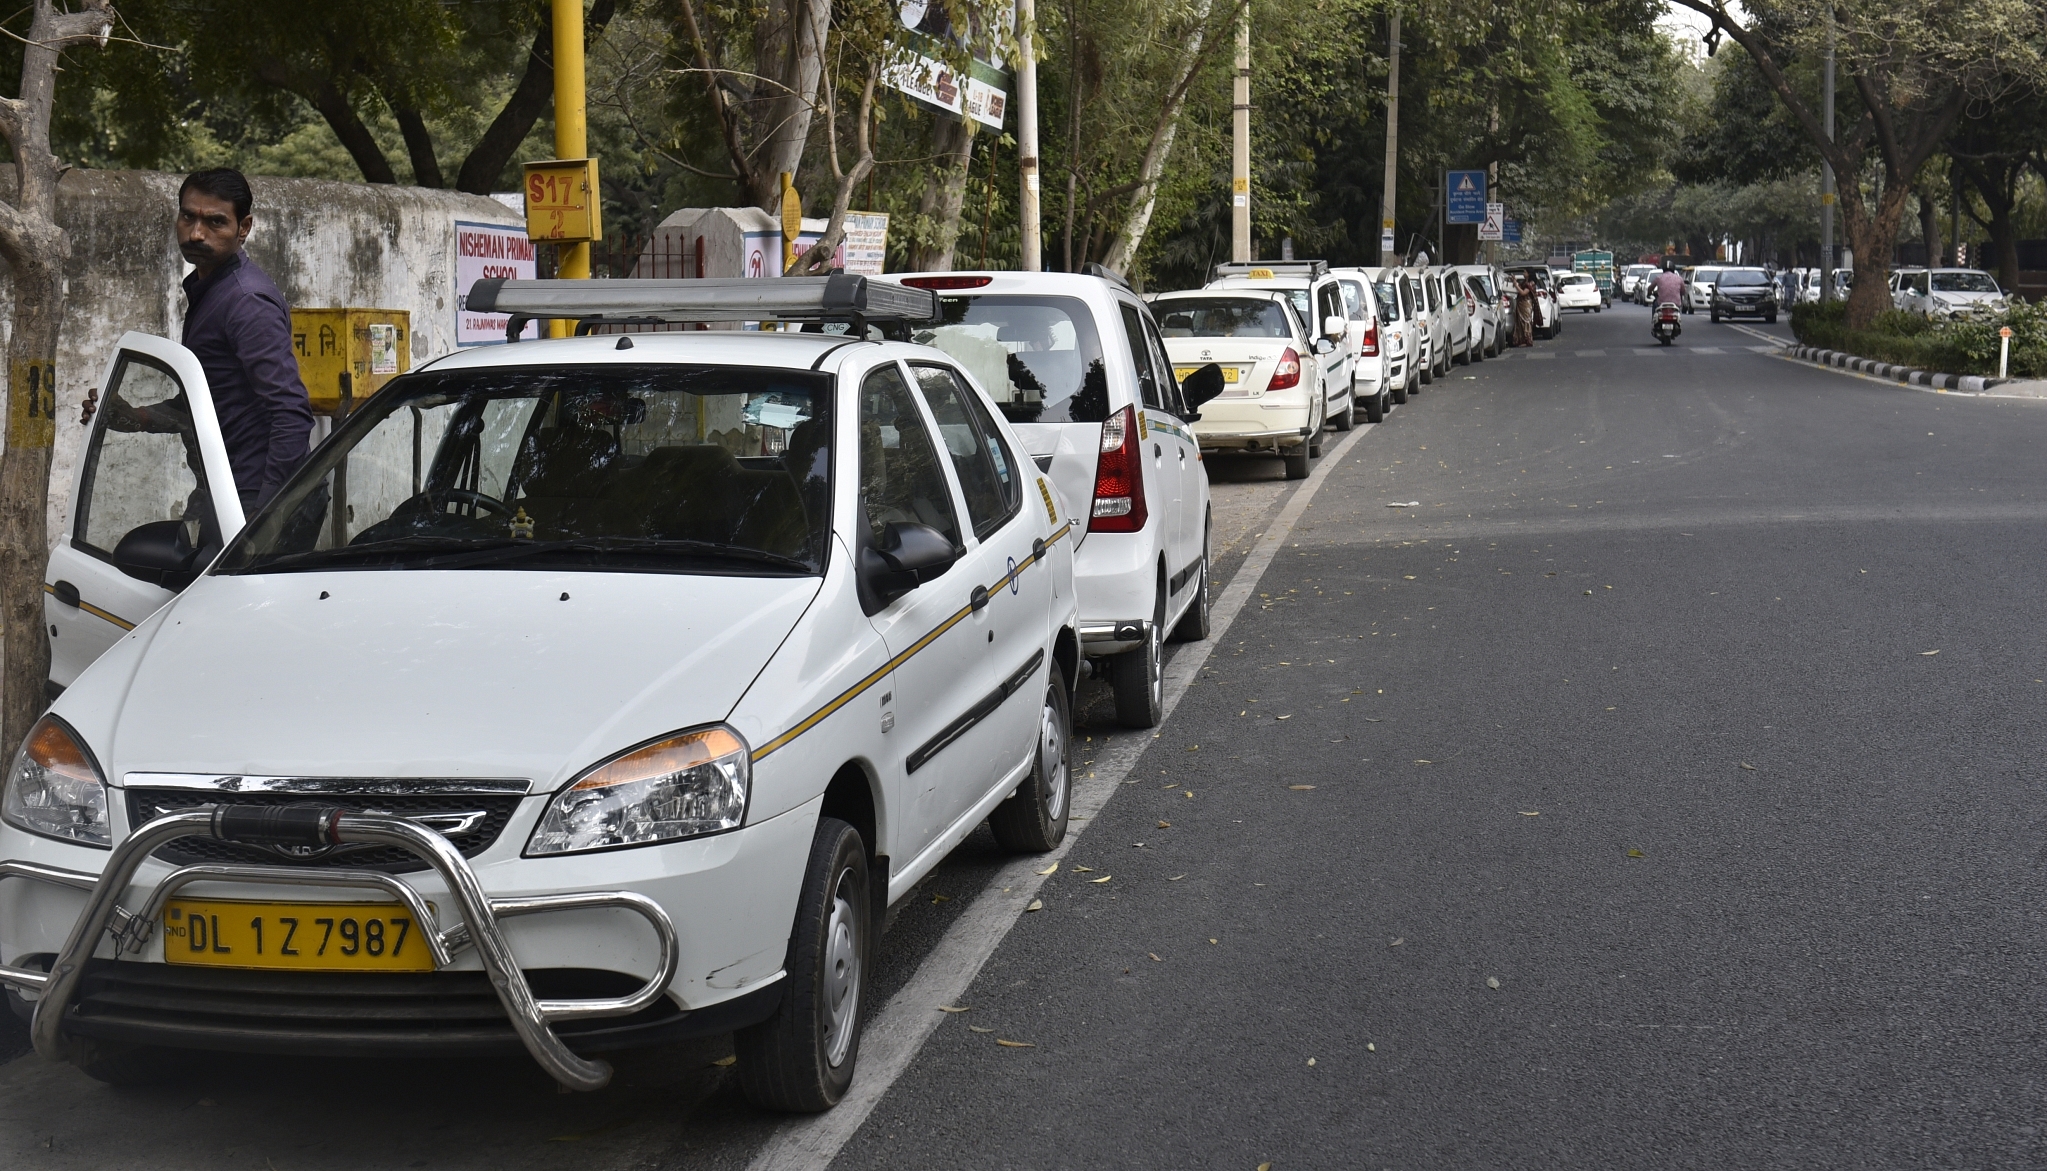 Ola and Uber Cabs (representative images) (Sushil Kumar/Hindustan Times via Getty Images)